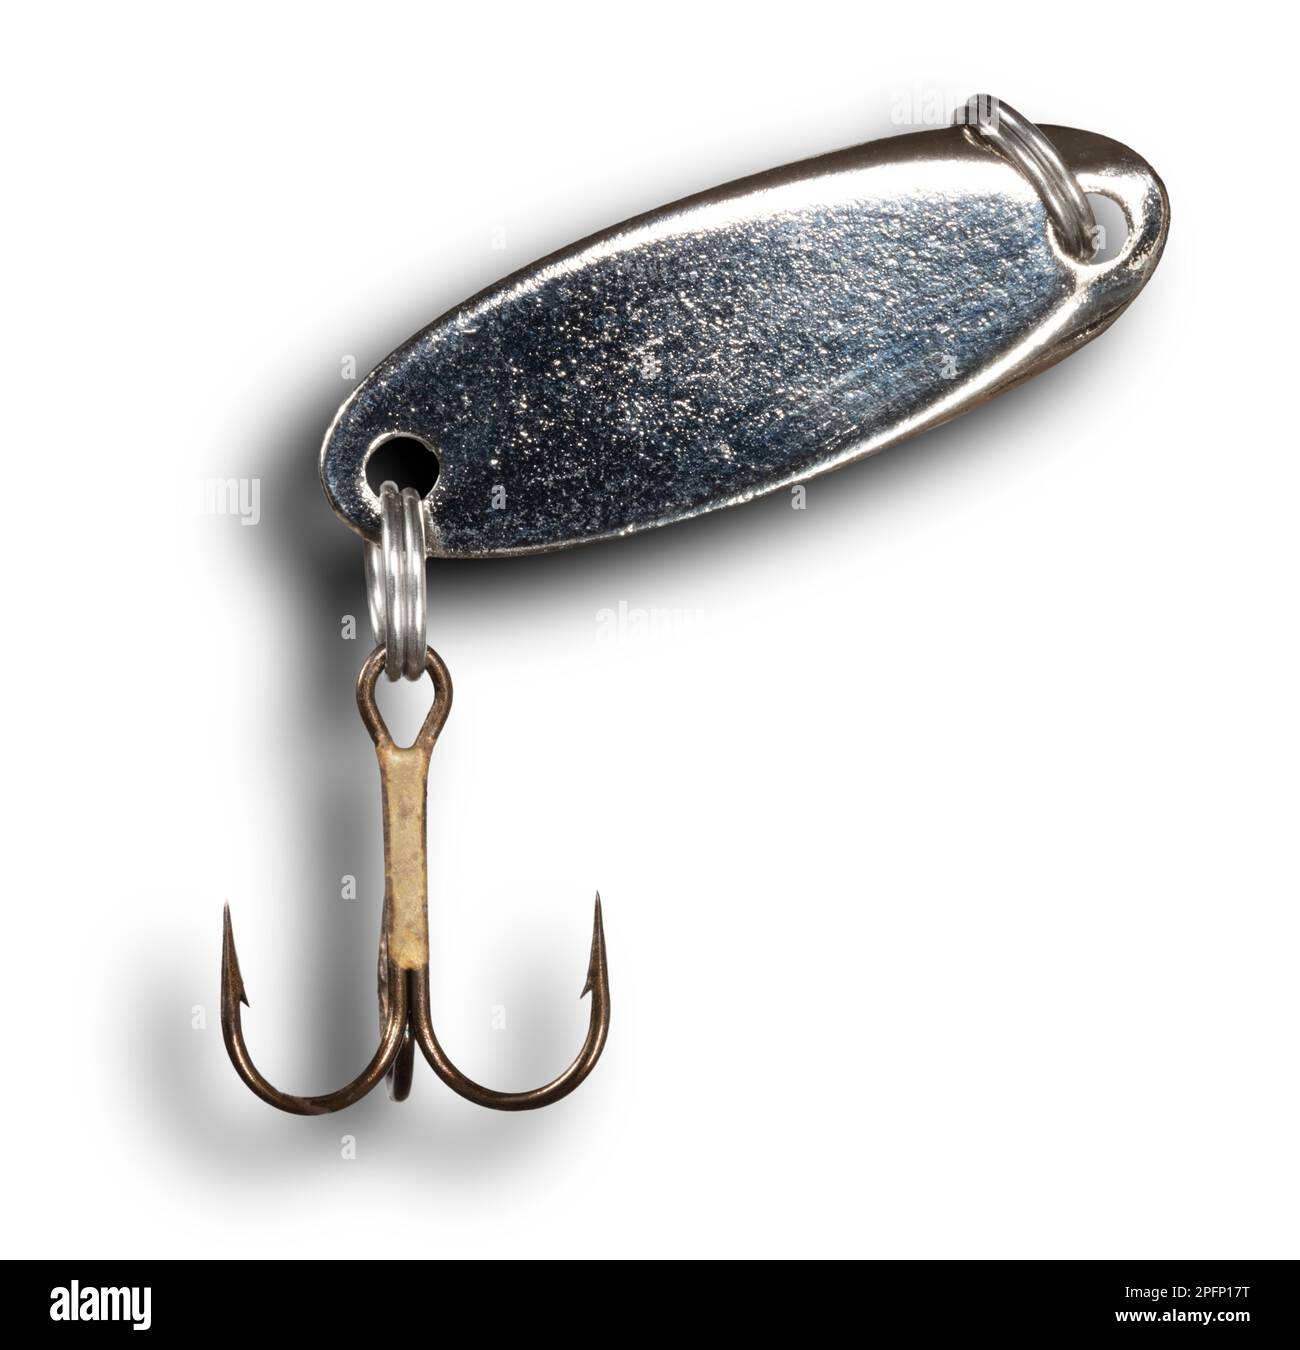 https://c8.alamy.com/comp/2PFP17T/shadow-behind-a-shiny-spoon-for-fishing-with-treble-hook-below-the-lure-2PFP17T.jpg